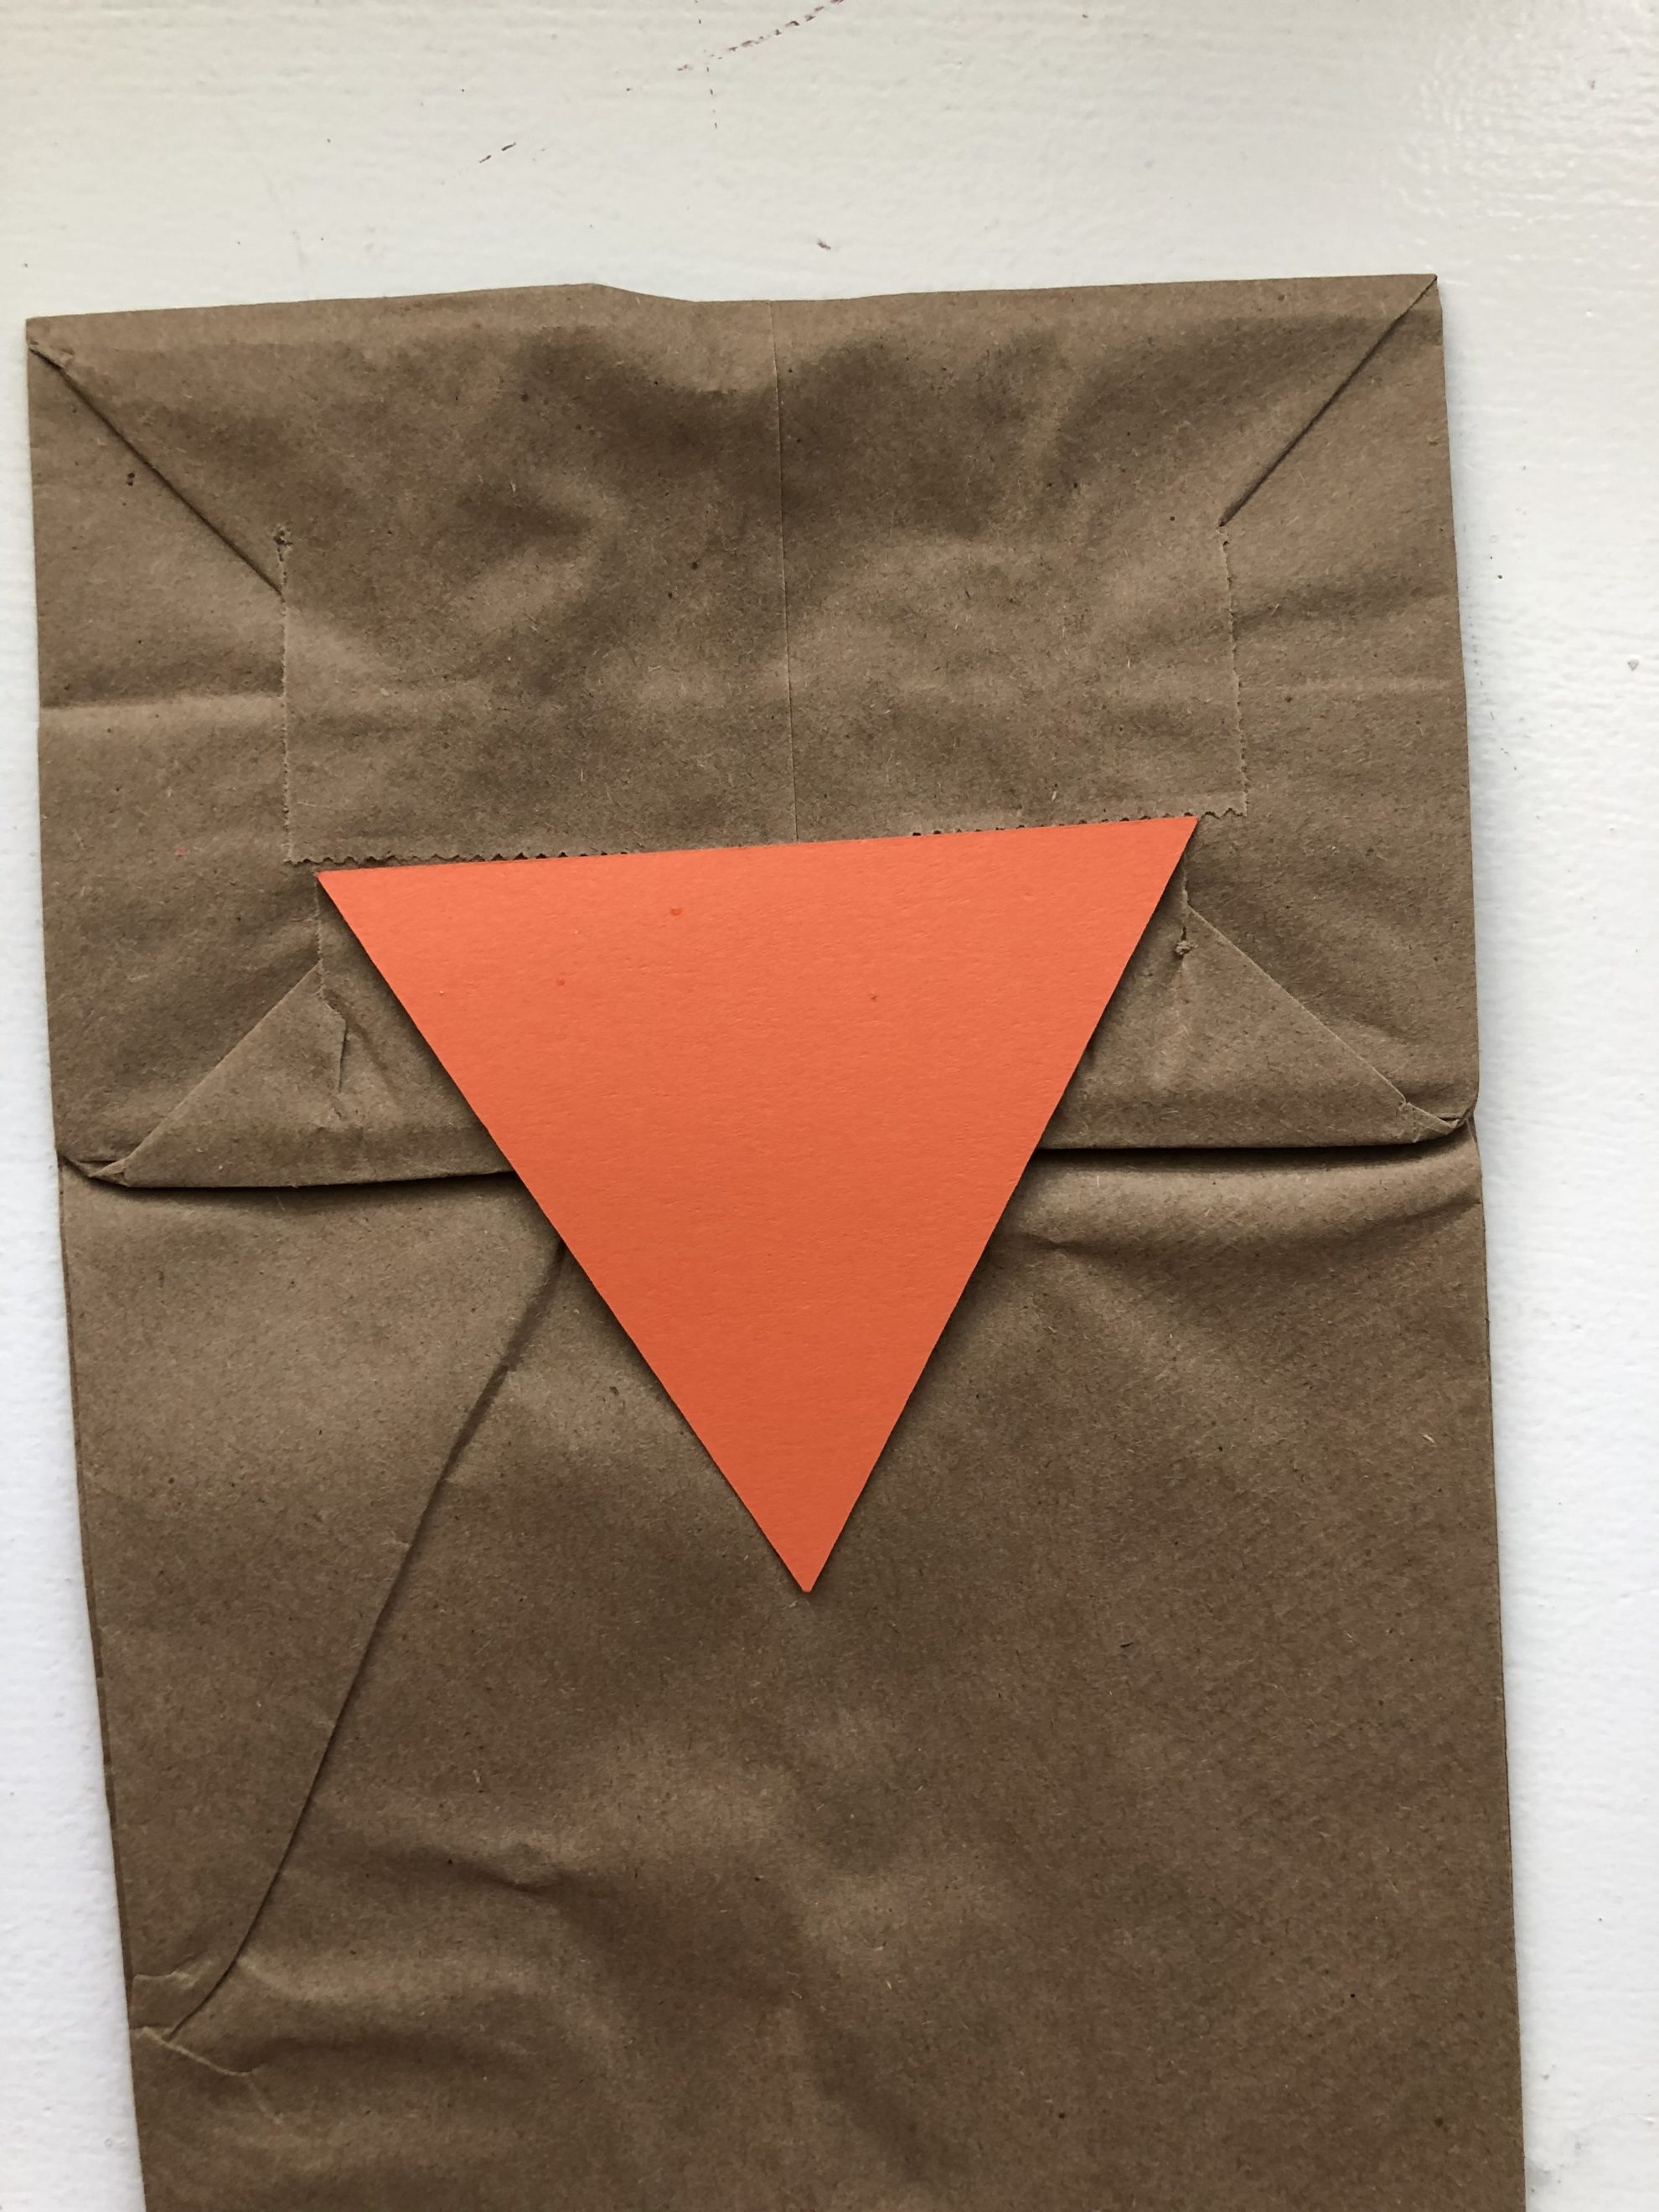 Top view of a brown paper bag with an orange triangle glued on the bag.